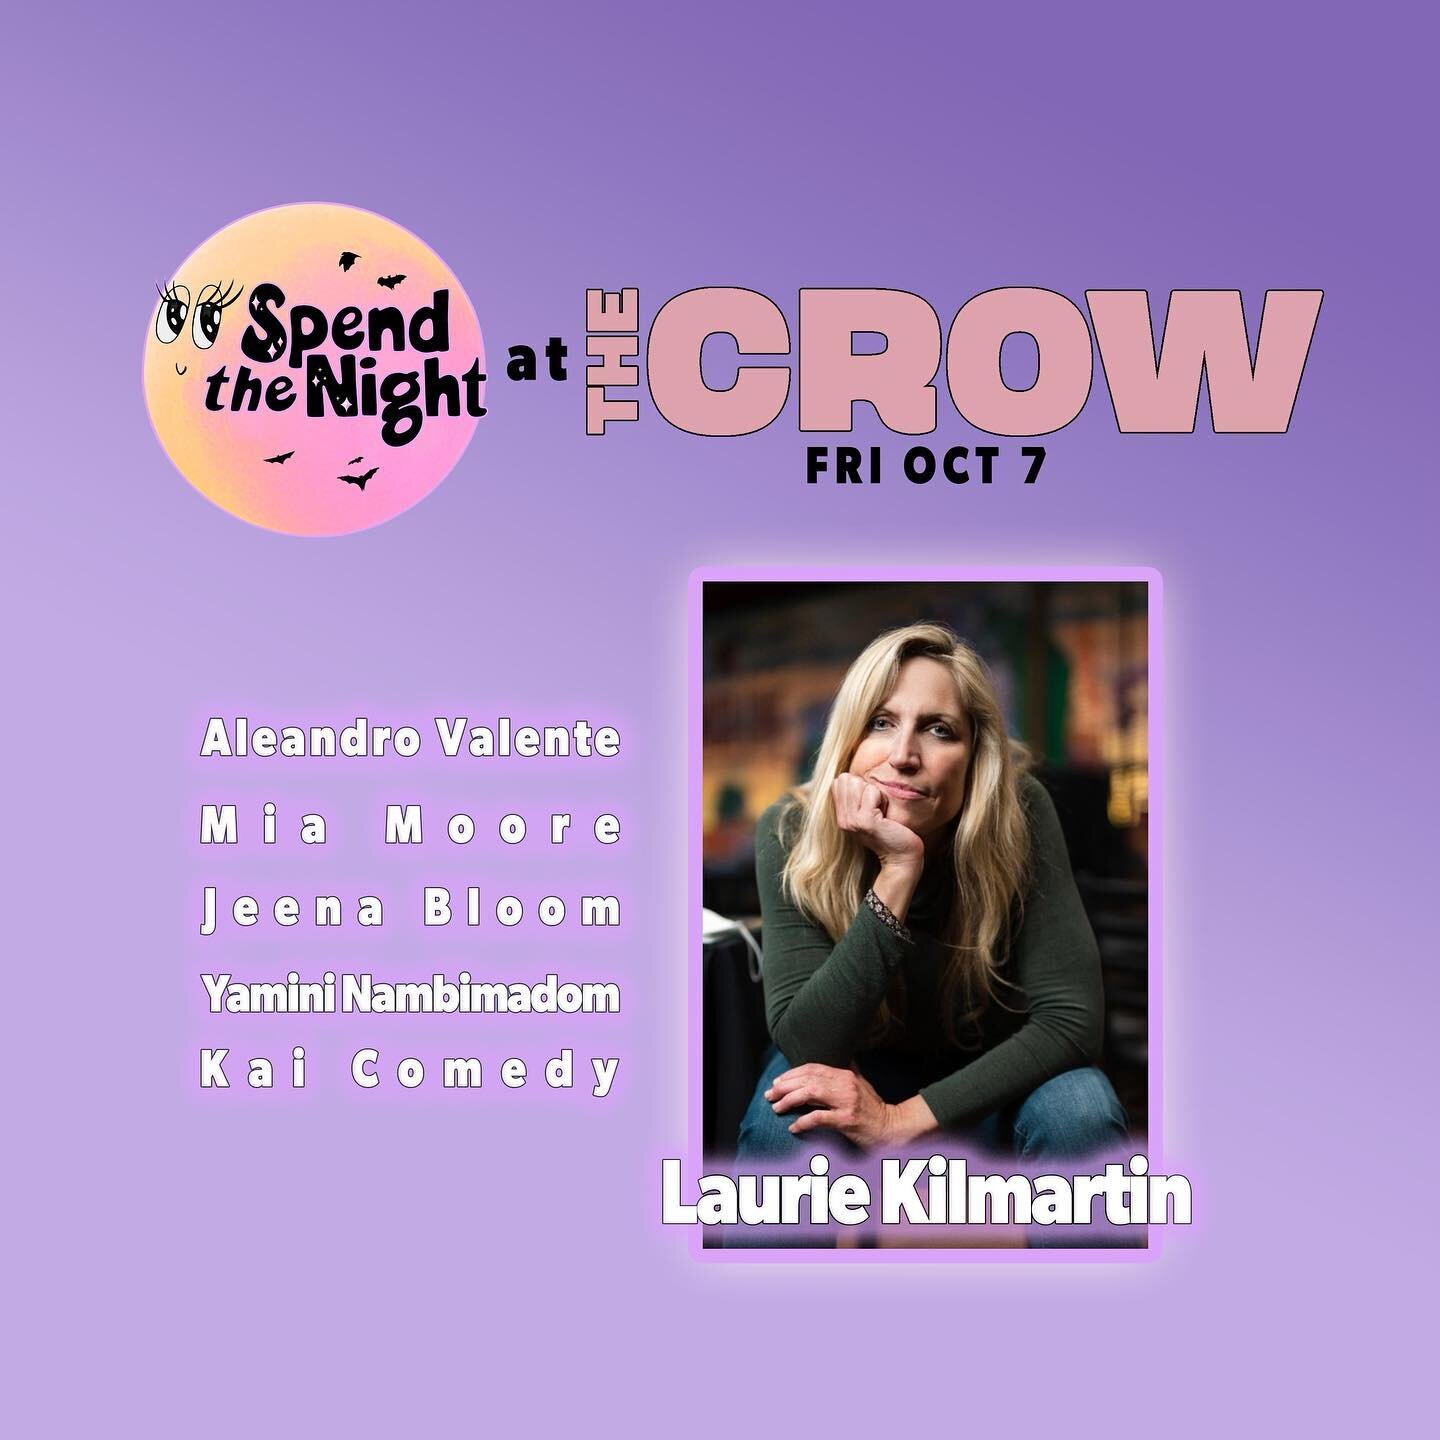 💕🔥TONIGHT🔥💕 please join us LIVE at the @crowcomedy it&rsquo;s gonna be an amazing show! 

🎃or livestream the show on our patreon!🎃 
.
.
.
.
.
.
#santamonicaevents #queercomedy #lacomedy